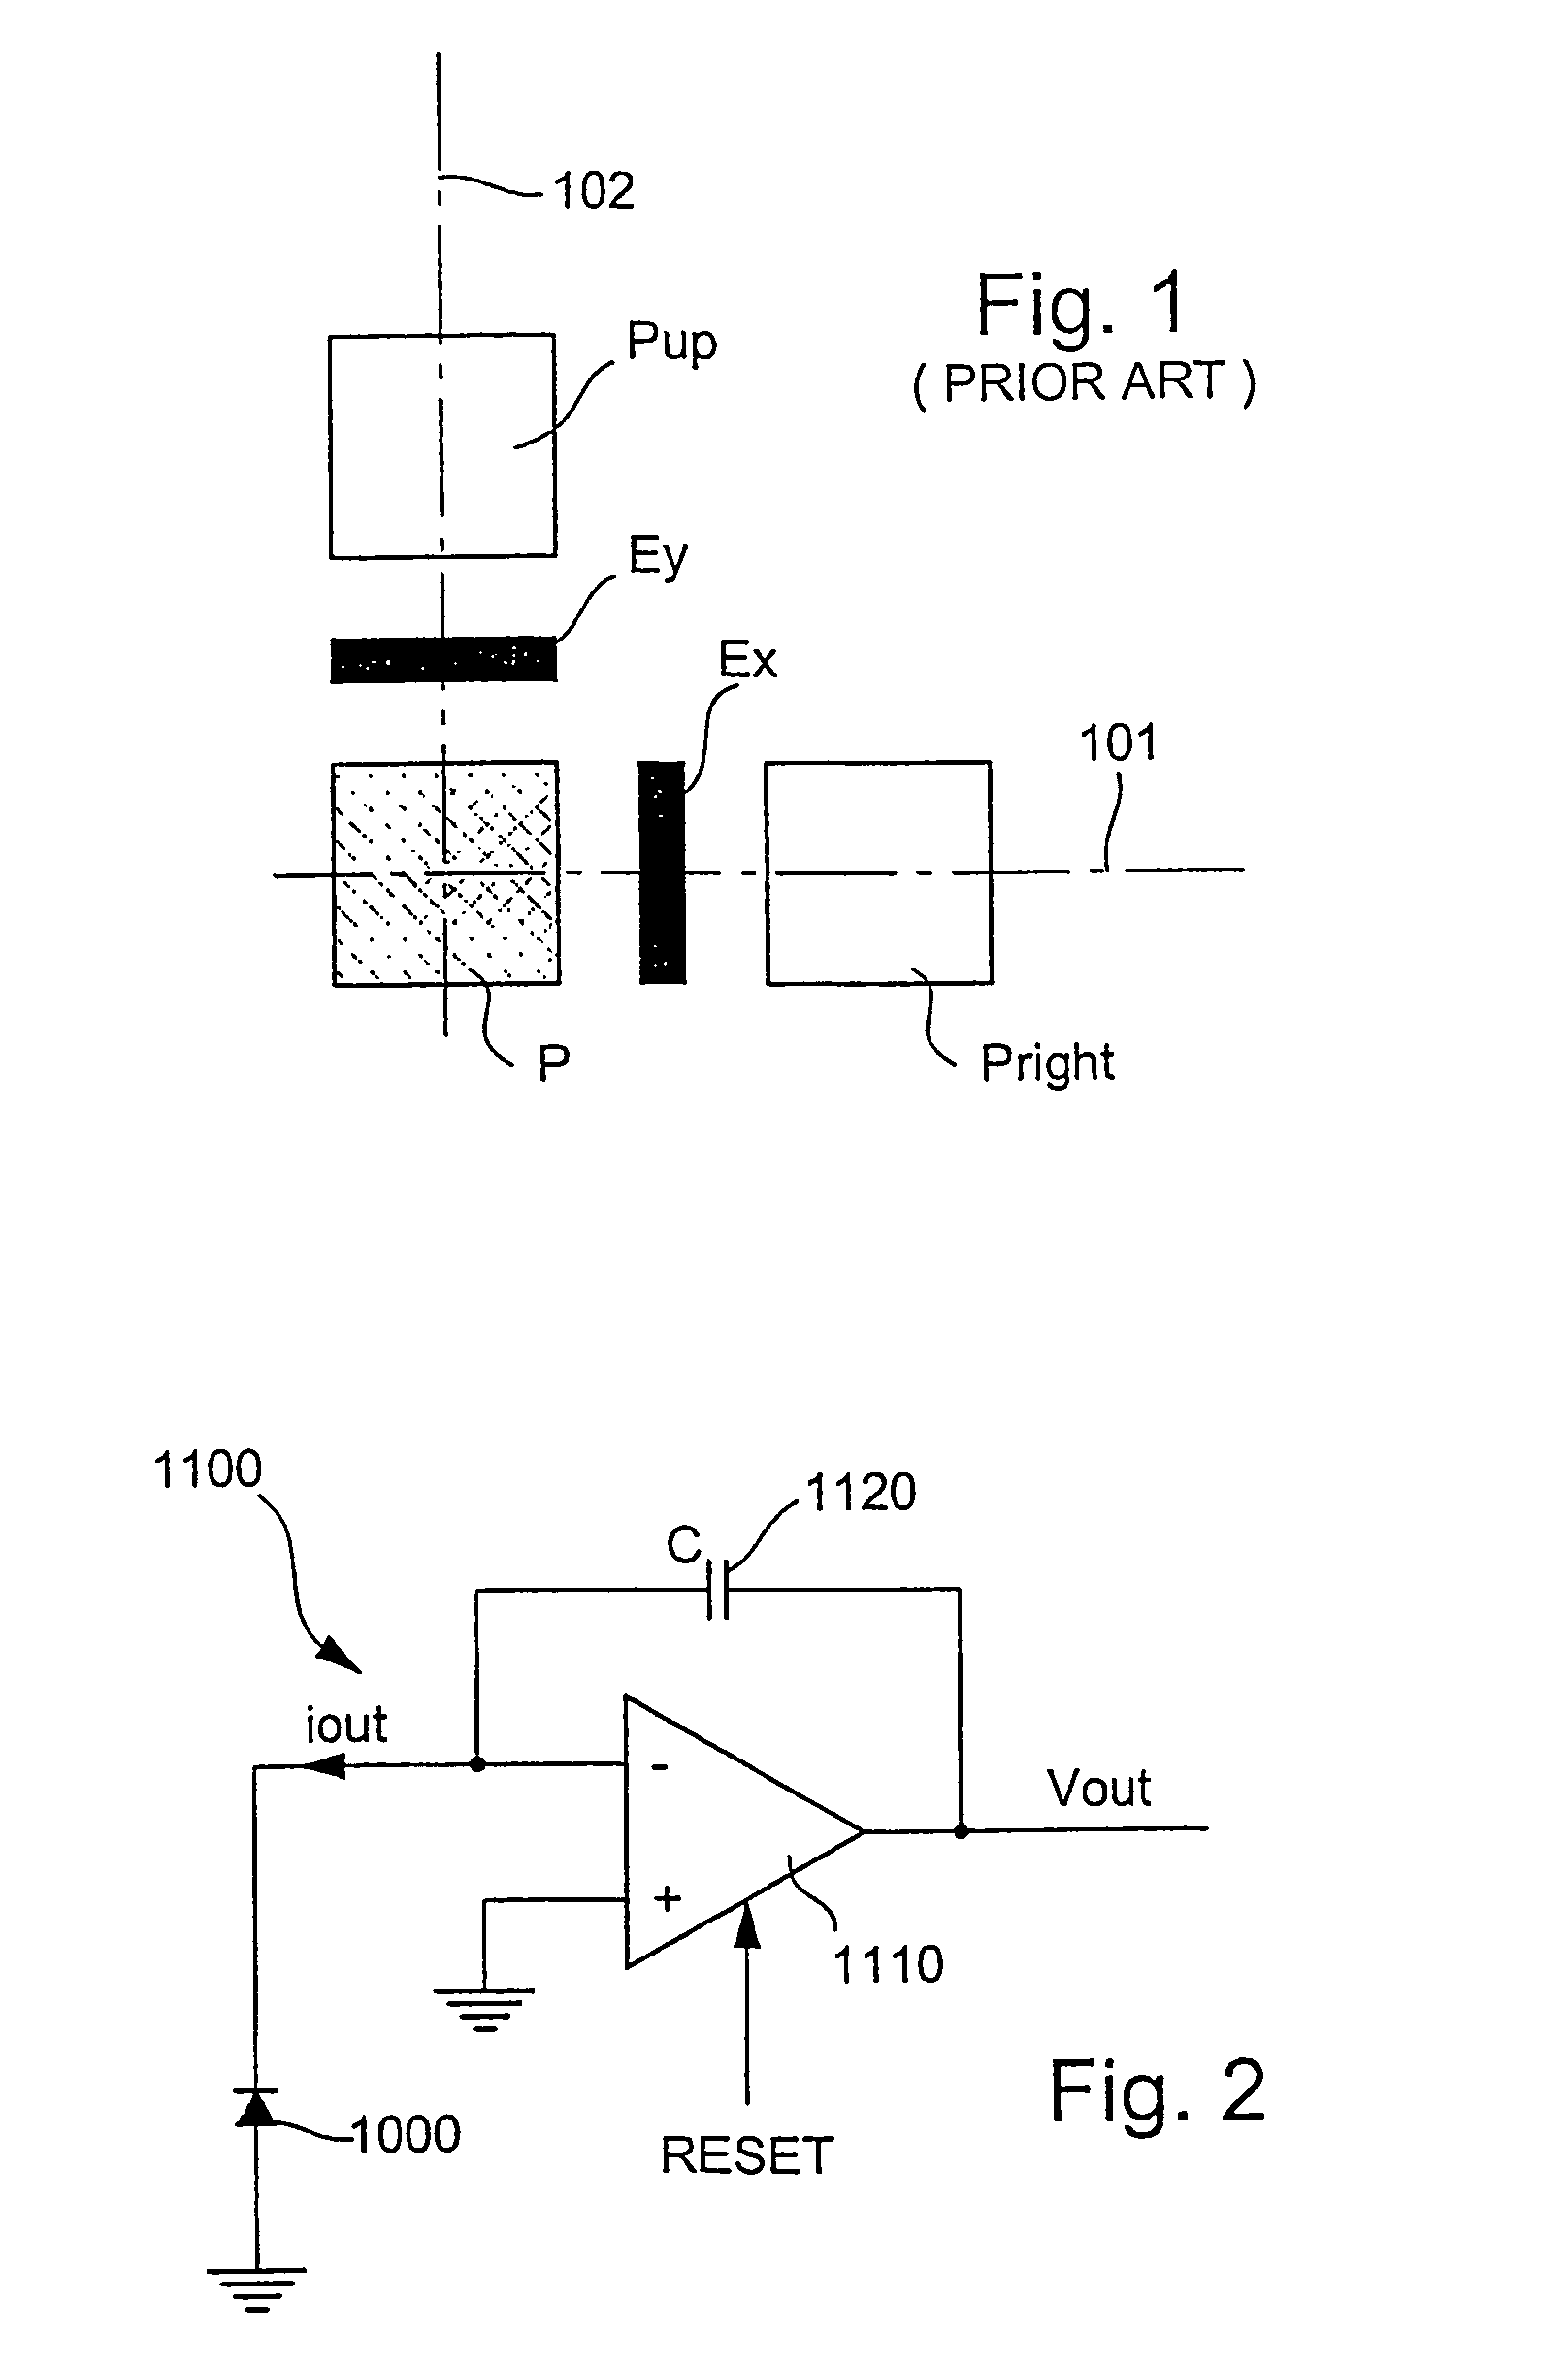 Method and sensing device for motion detection in an optical pointing device, such as an optical mouse